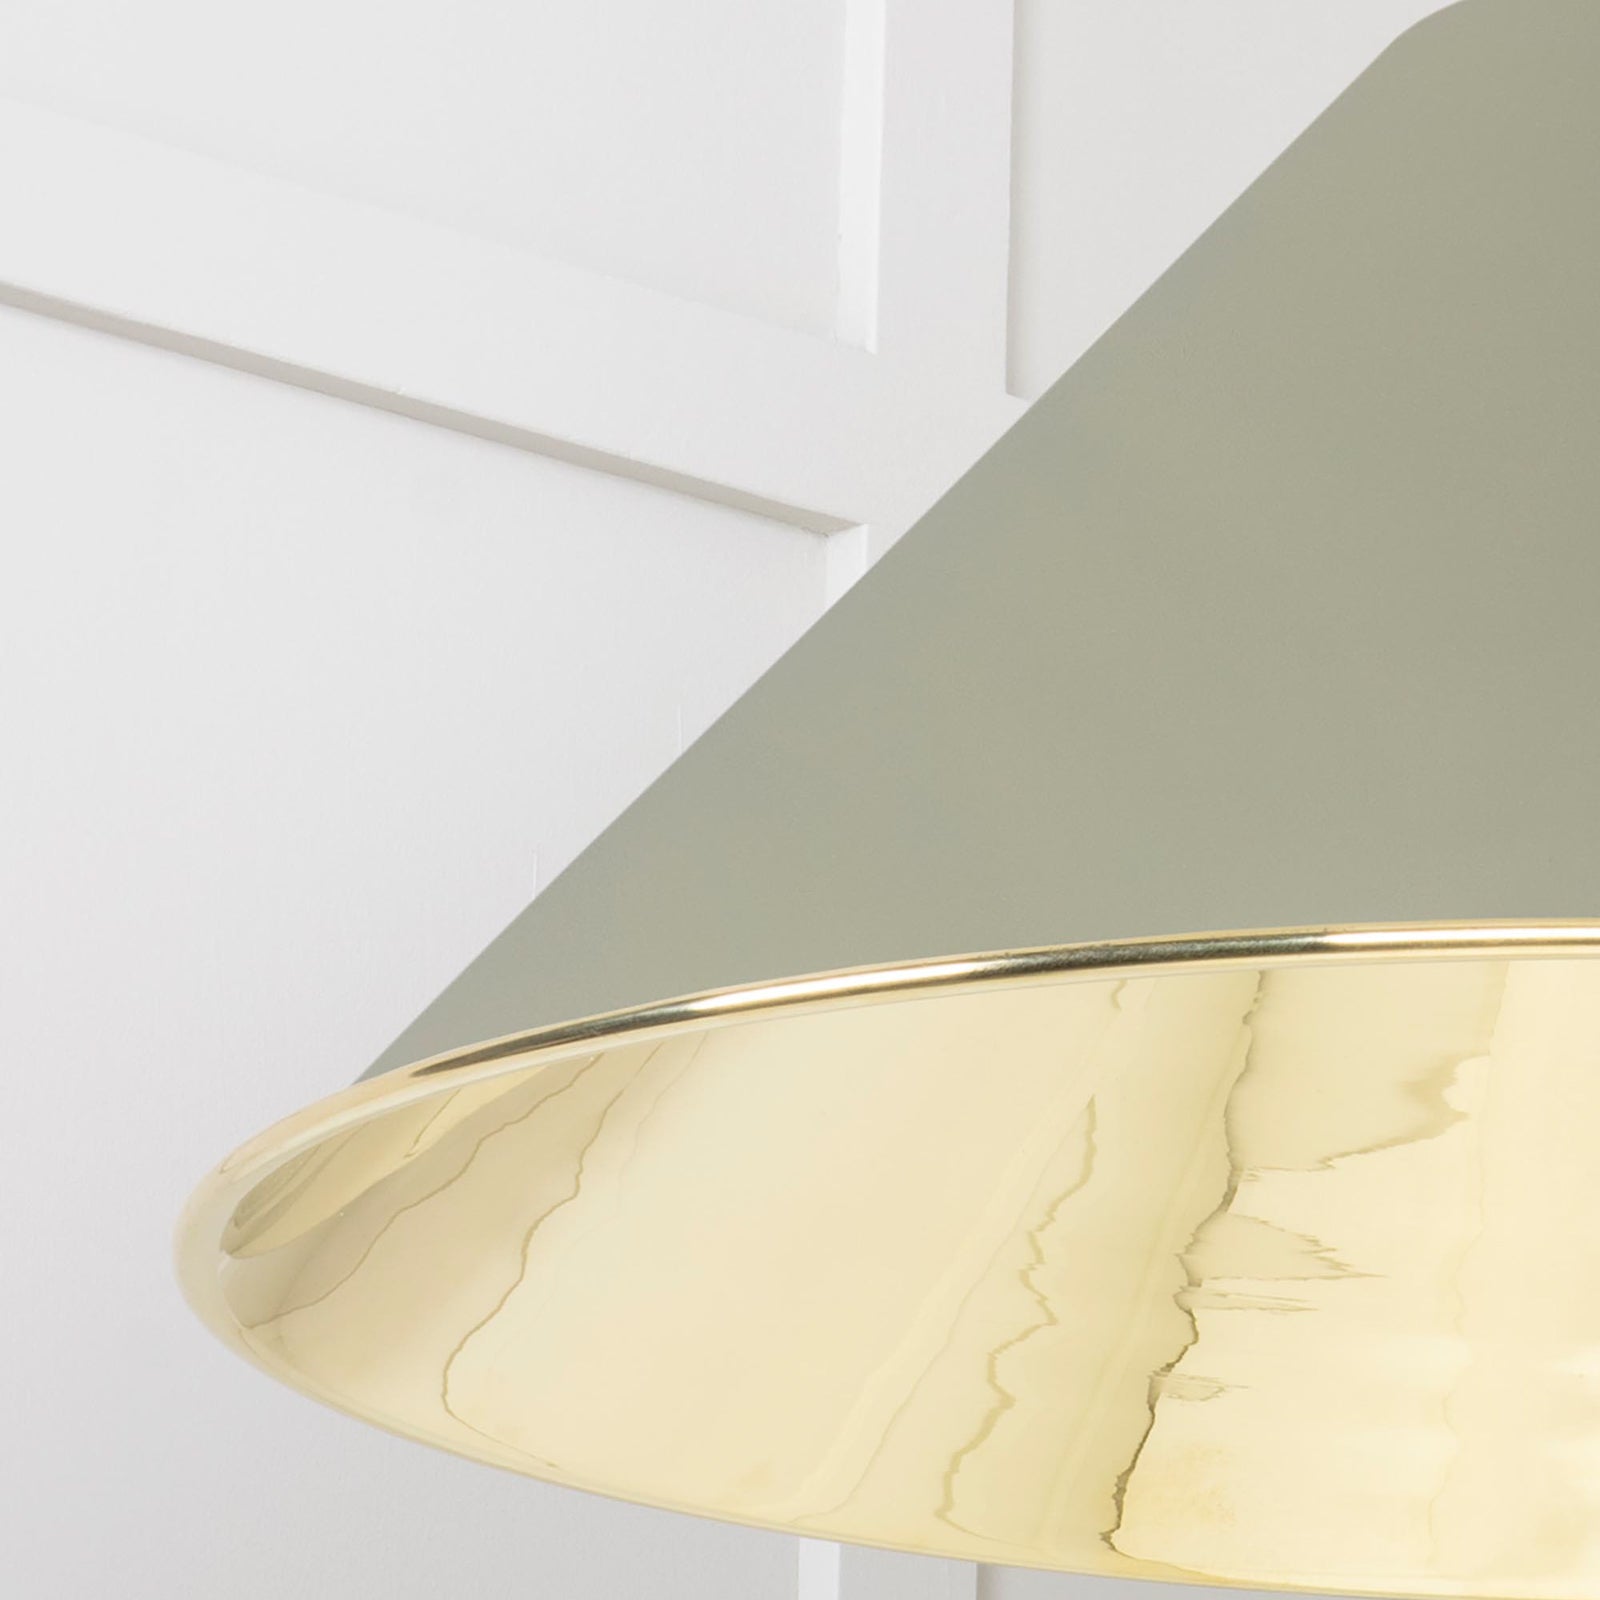 SHOW Close Up Image of Hockley Ceiling Light in Tump